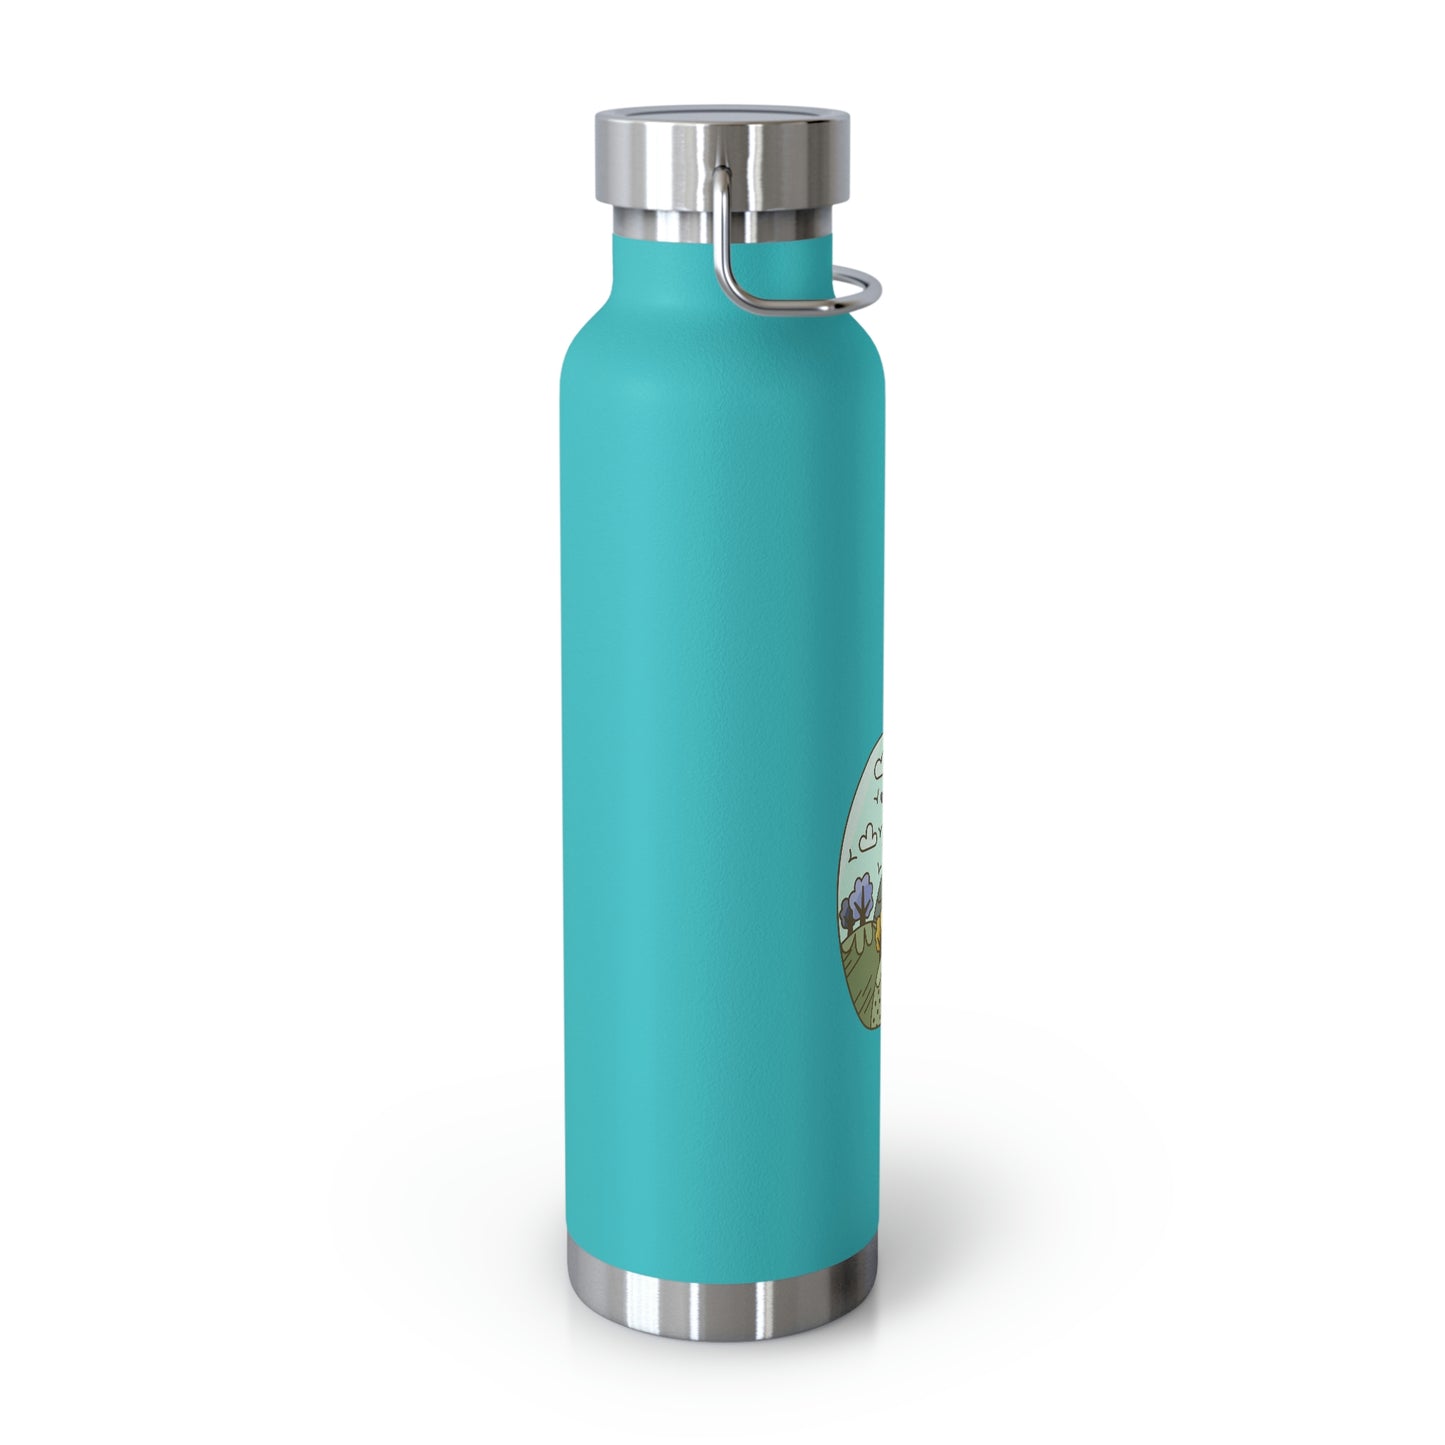 Take Care of Our Earth - Copper Vacuum Insulated Bottle, 22oz